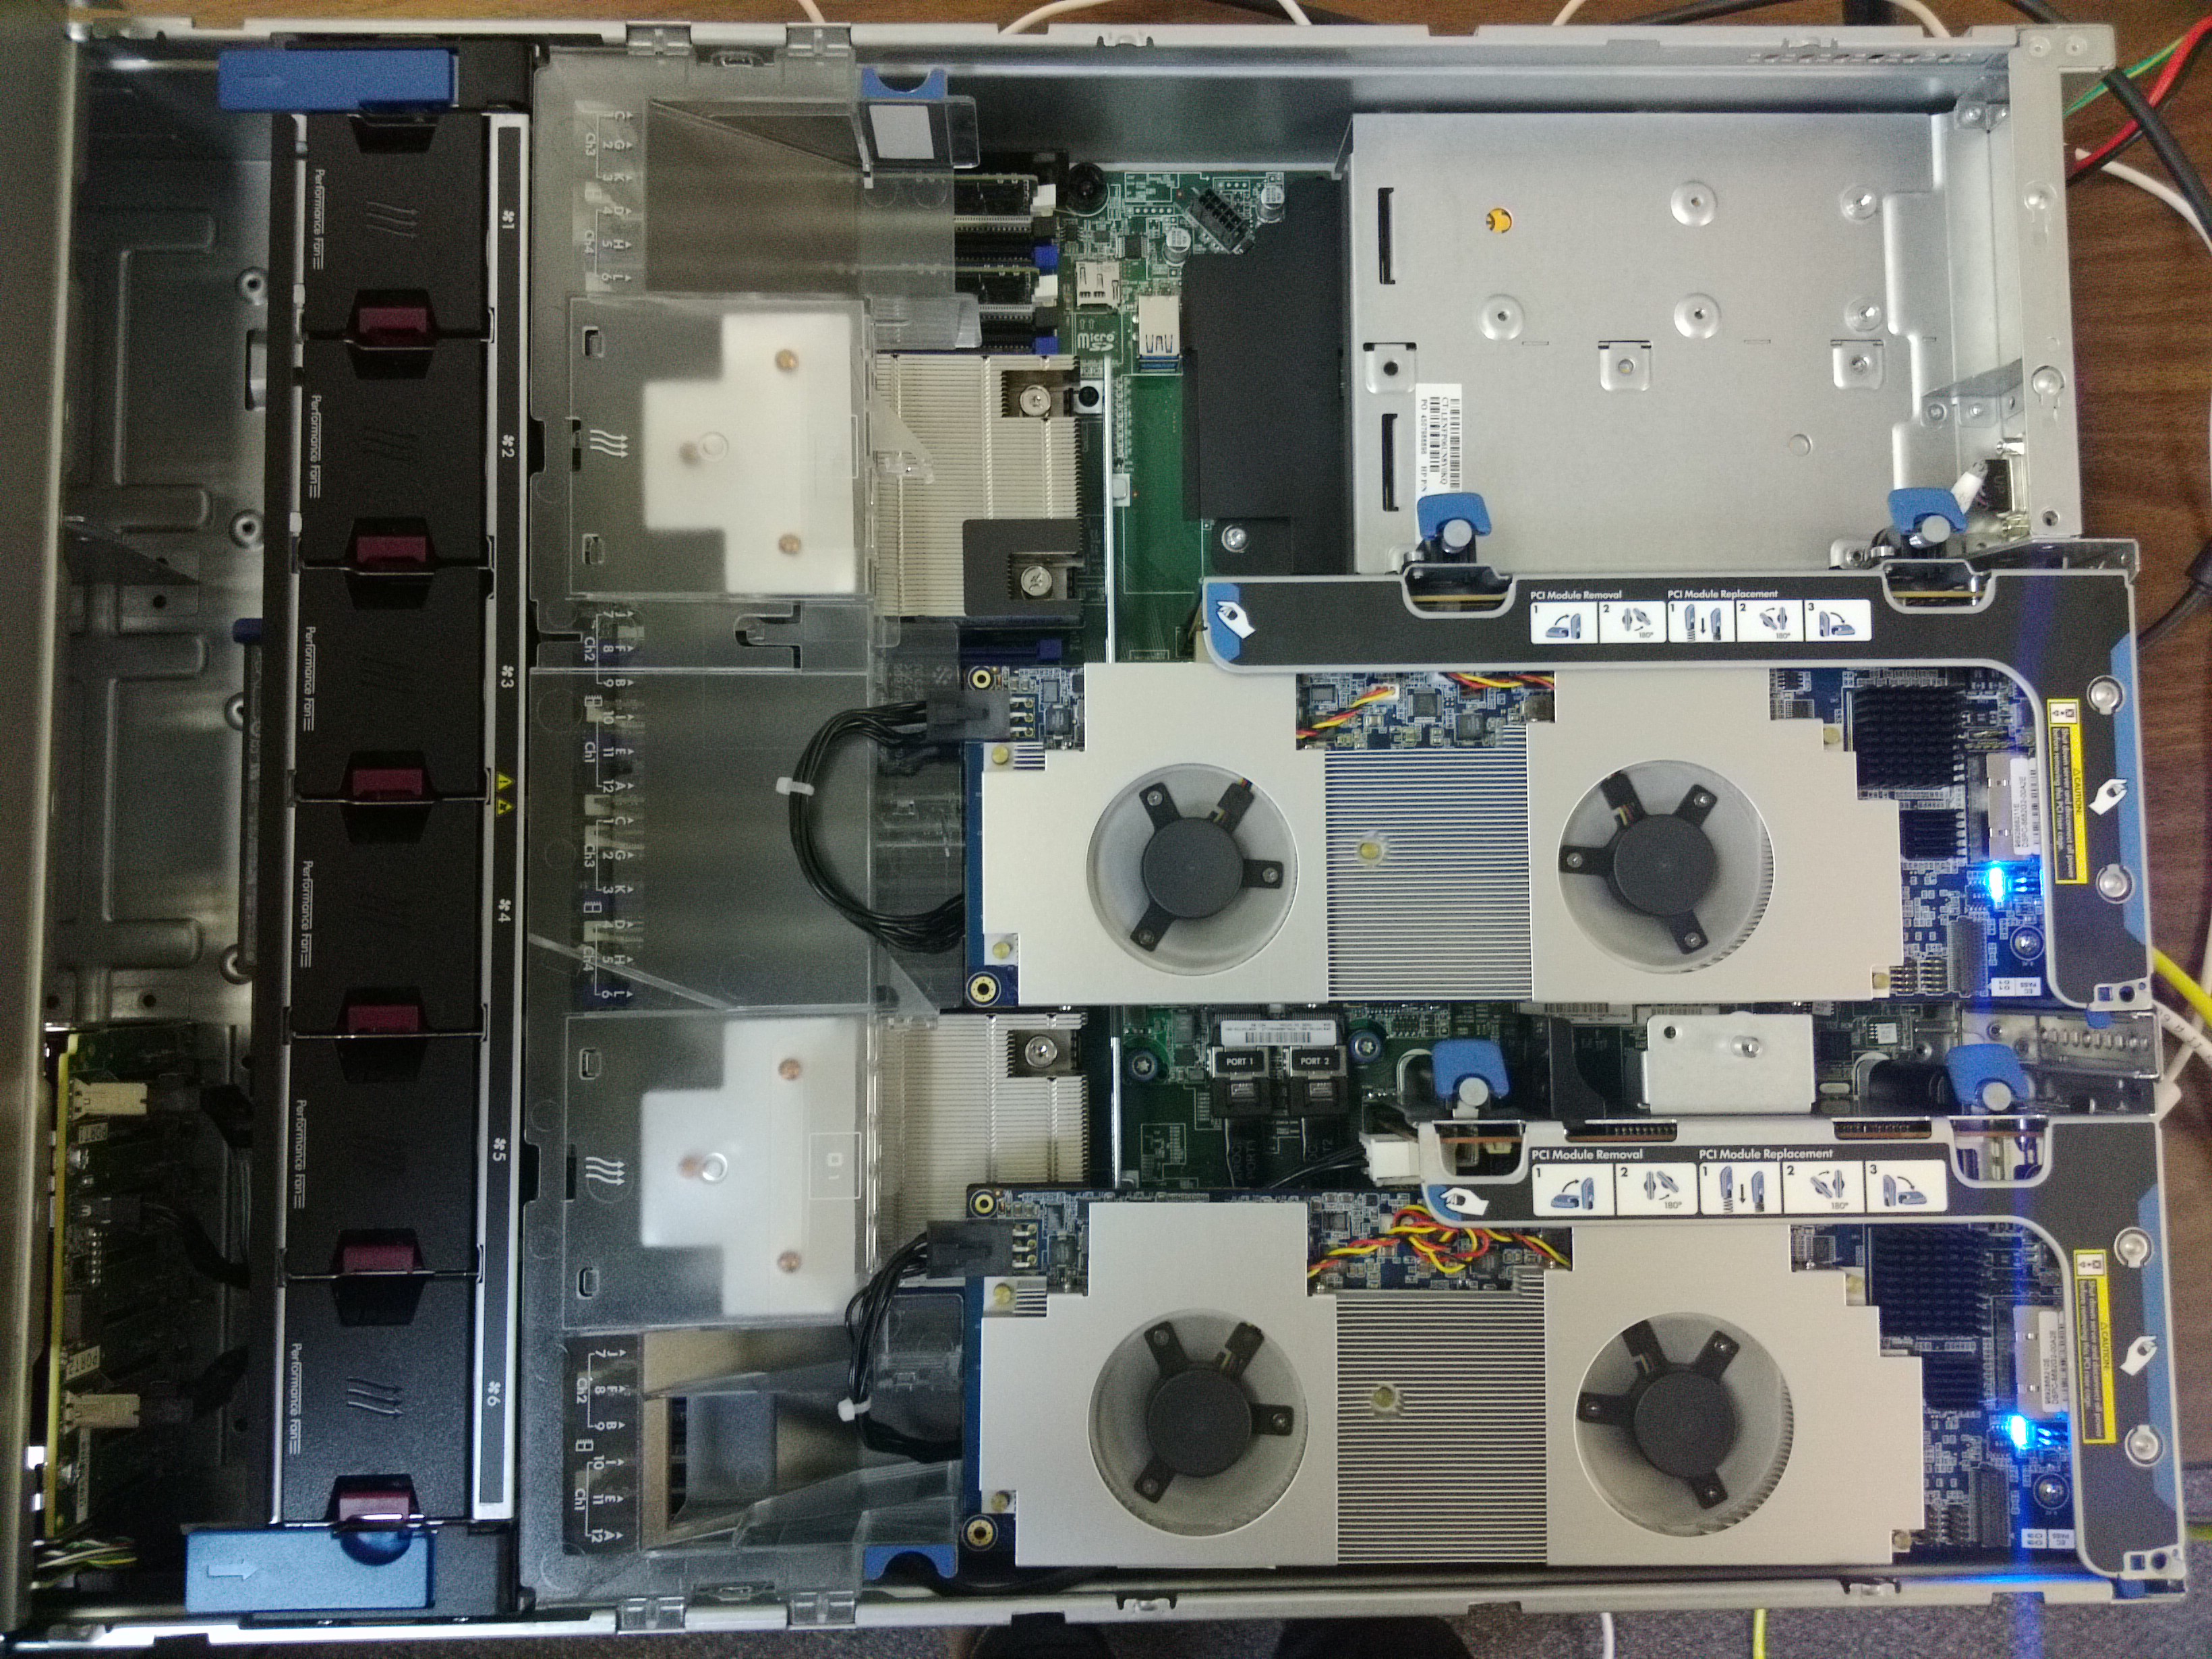 HP DL380 server with 128 c66x cores, suitable for cloud based deep learning training, testing, and model compression